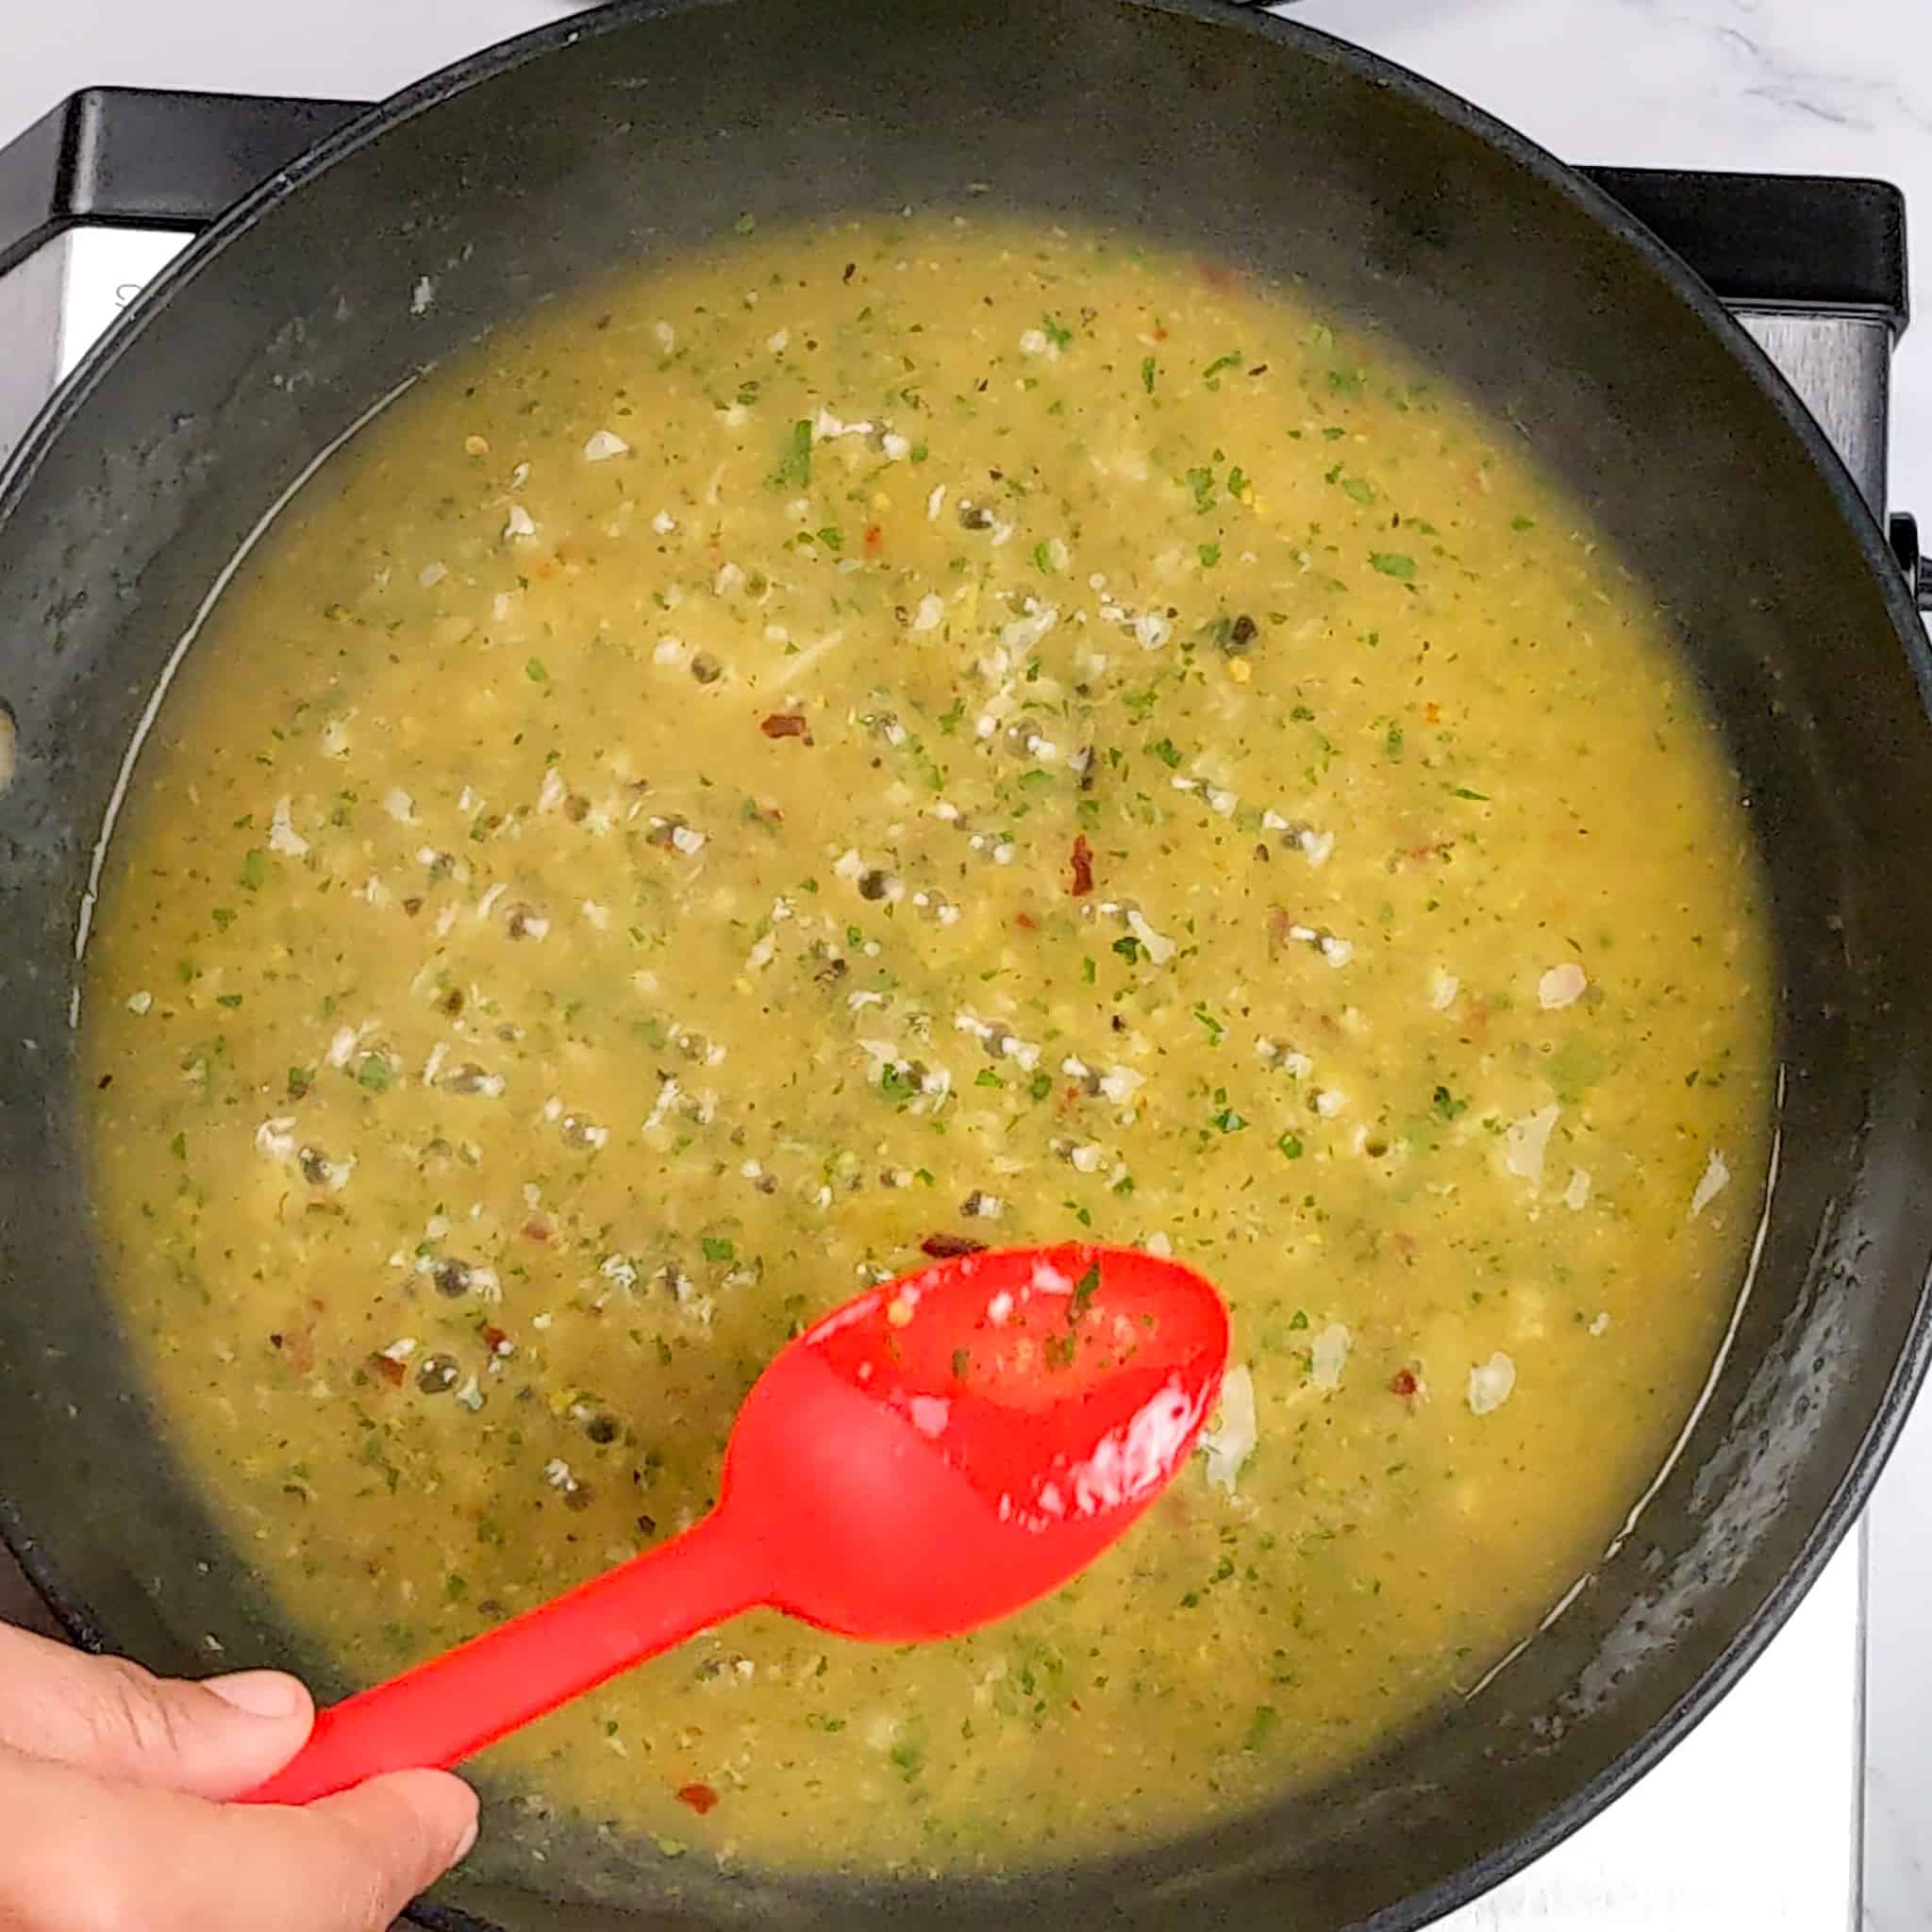 the wet lemon pepper sauce reducing with small bubbles in a non-stick frying pan being tasted with a silicone red spoon